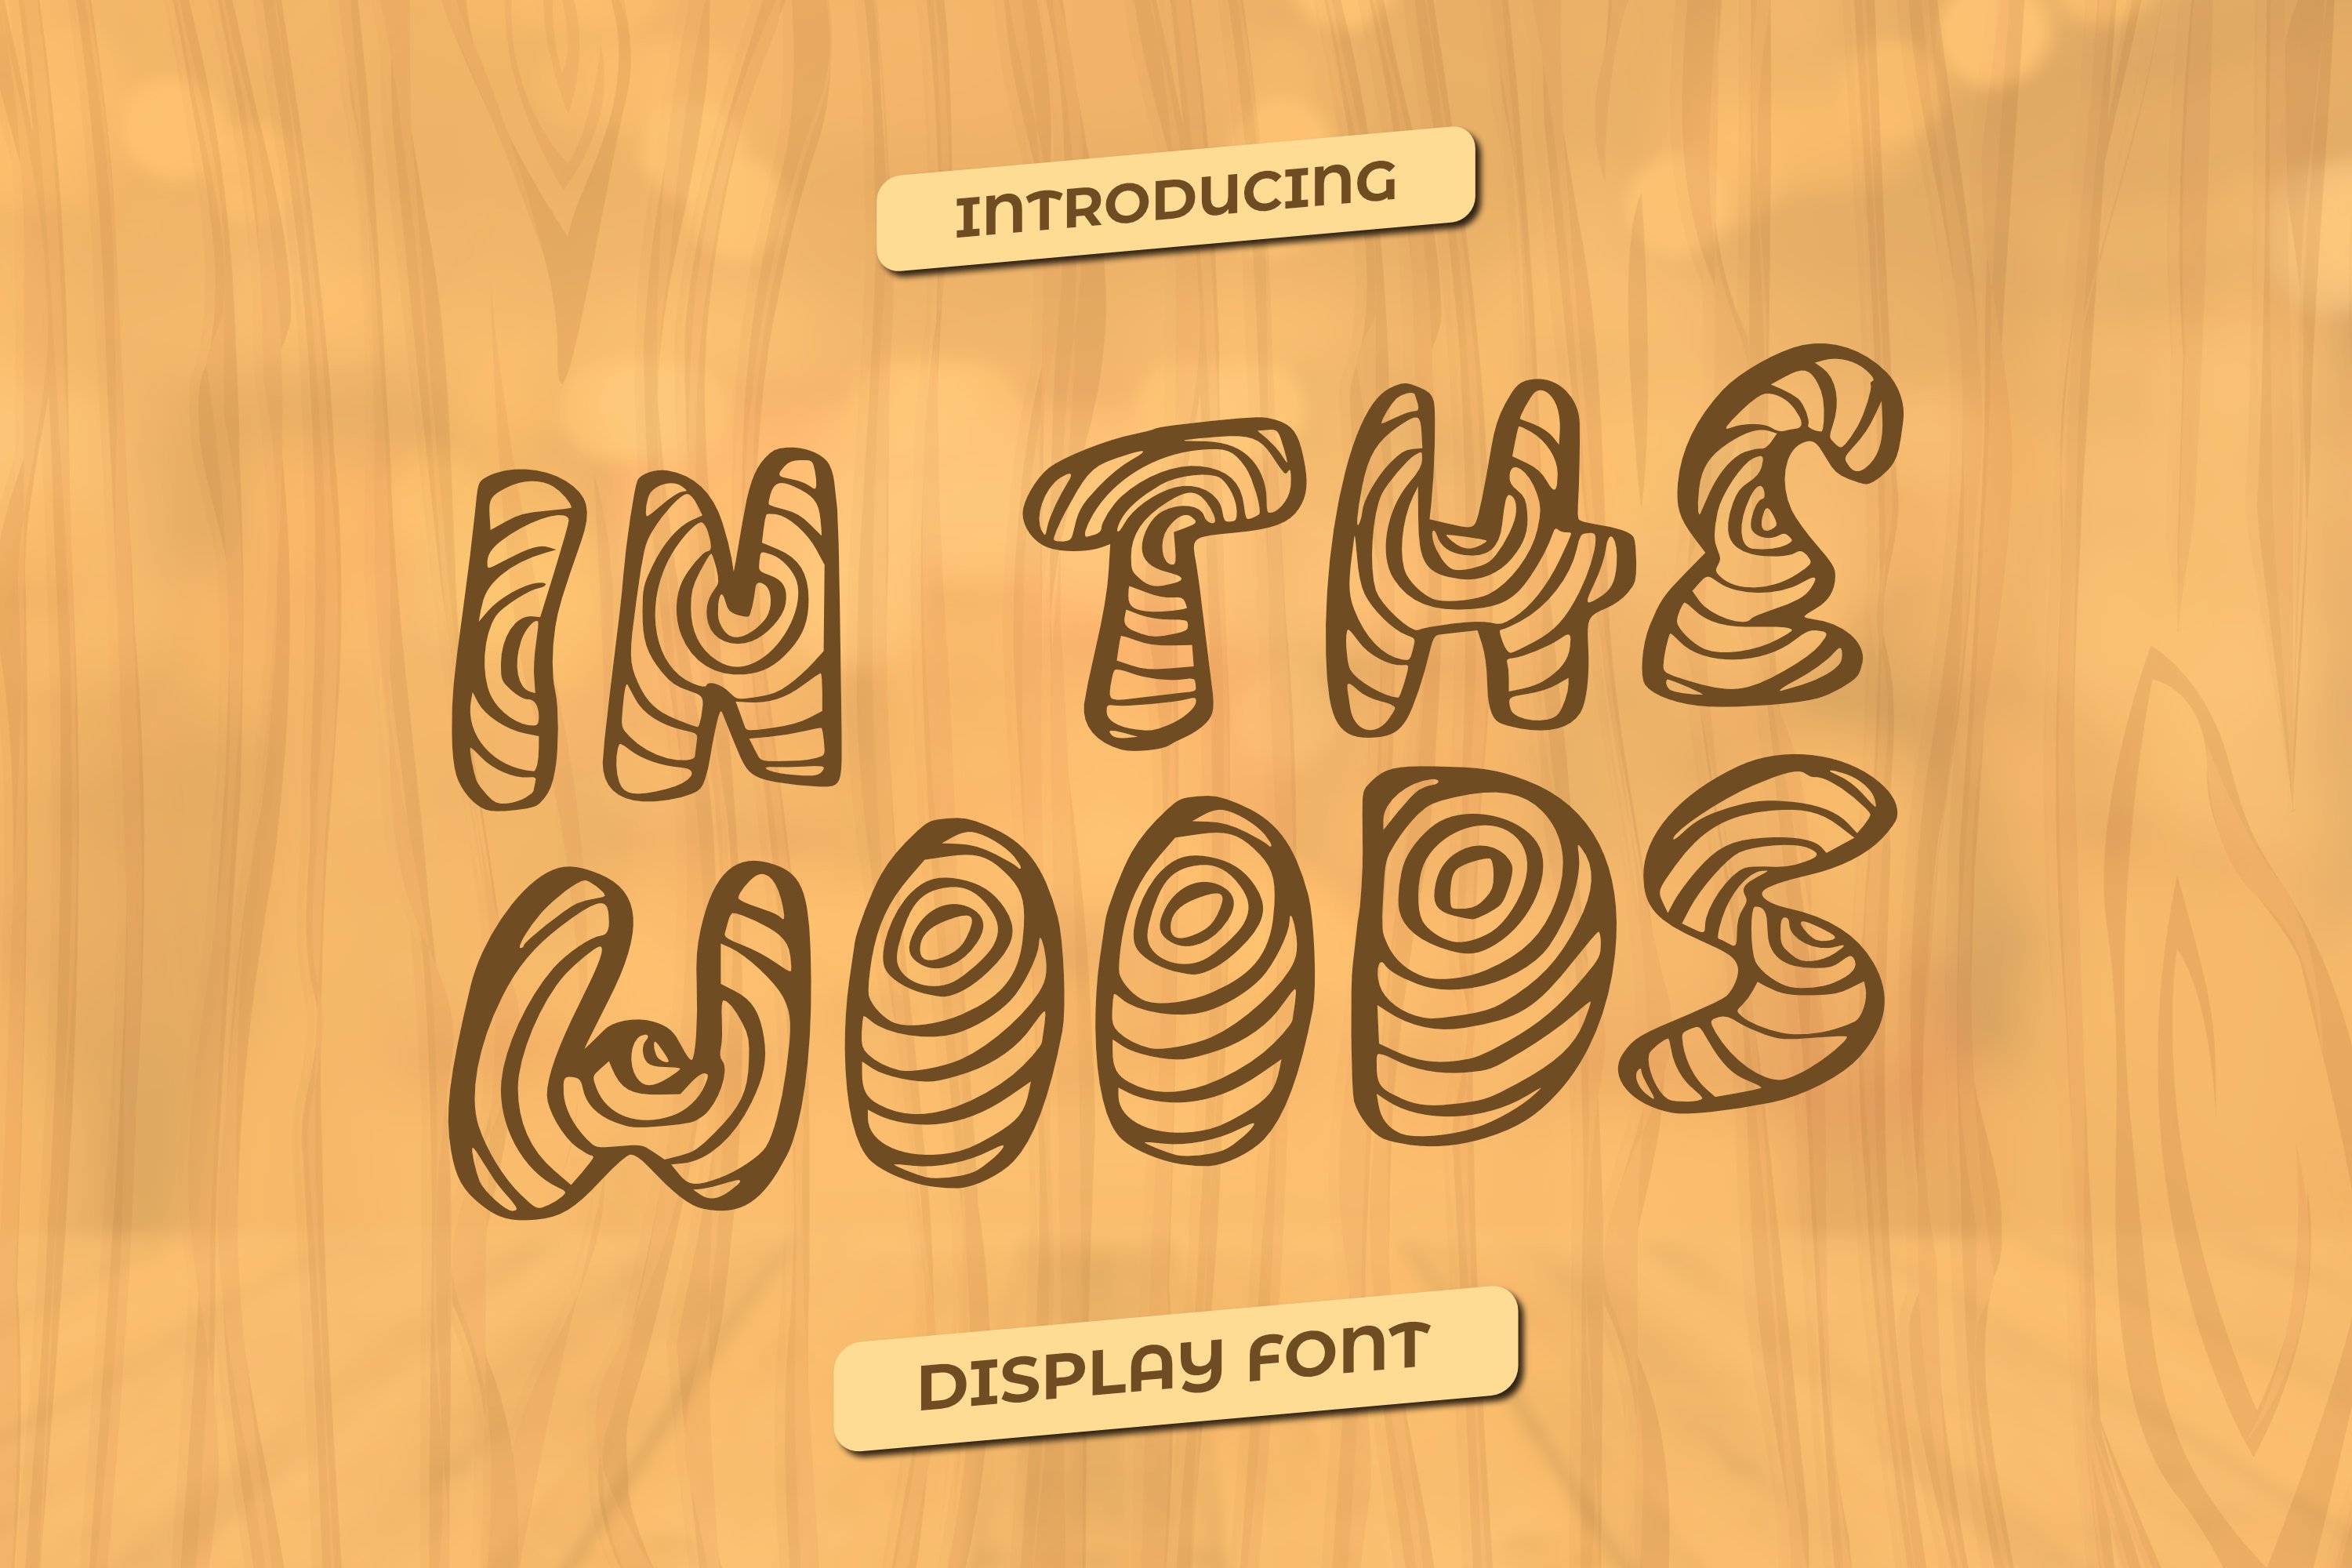 In The Woods Font cover image.